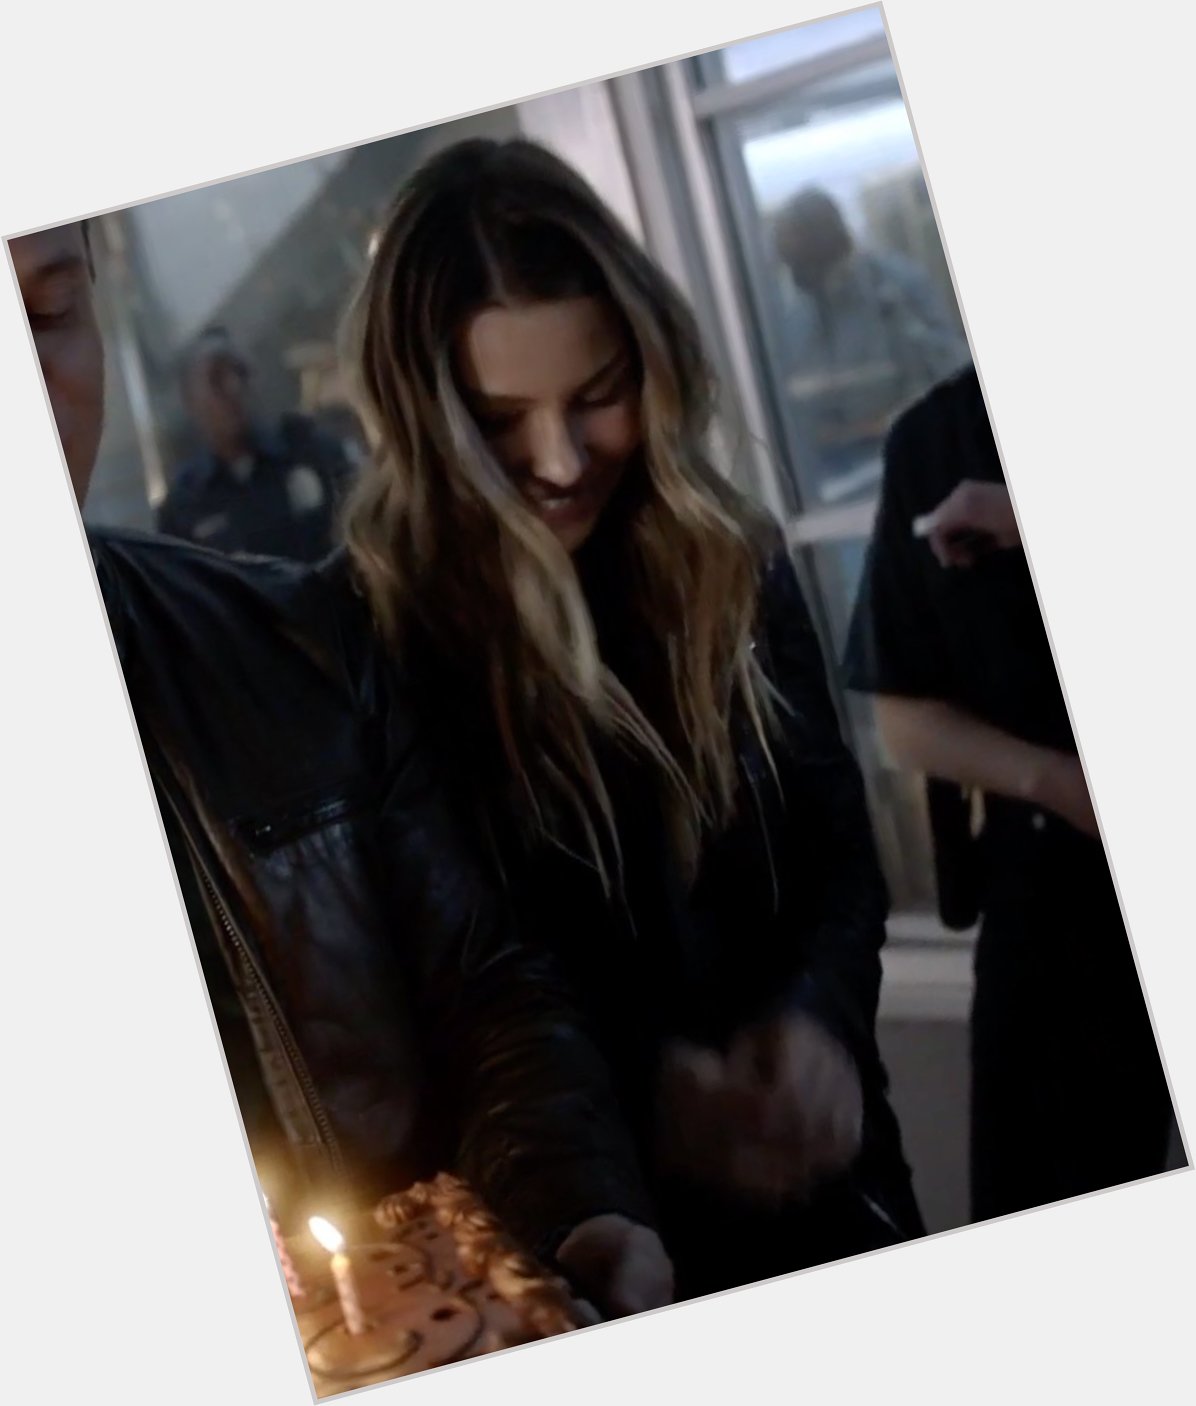 HAPPY BIRTHDAY THE MOST PERFECT PERSON EVER LAUREN GERMAN!   